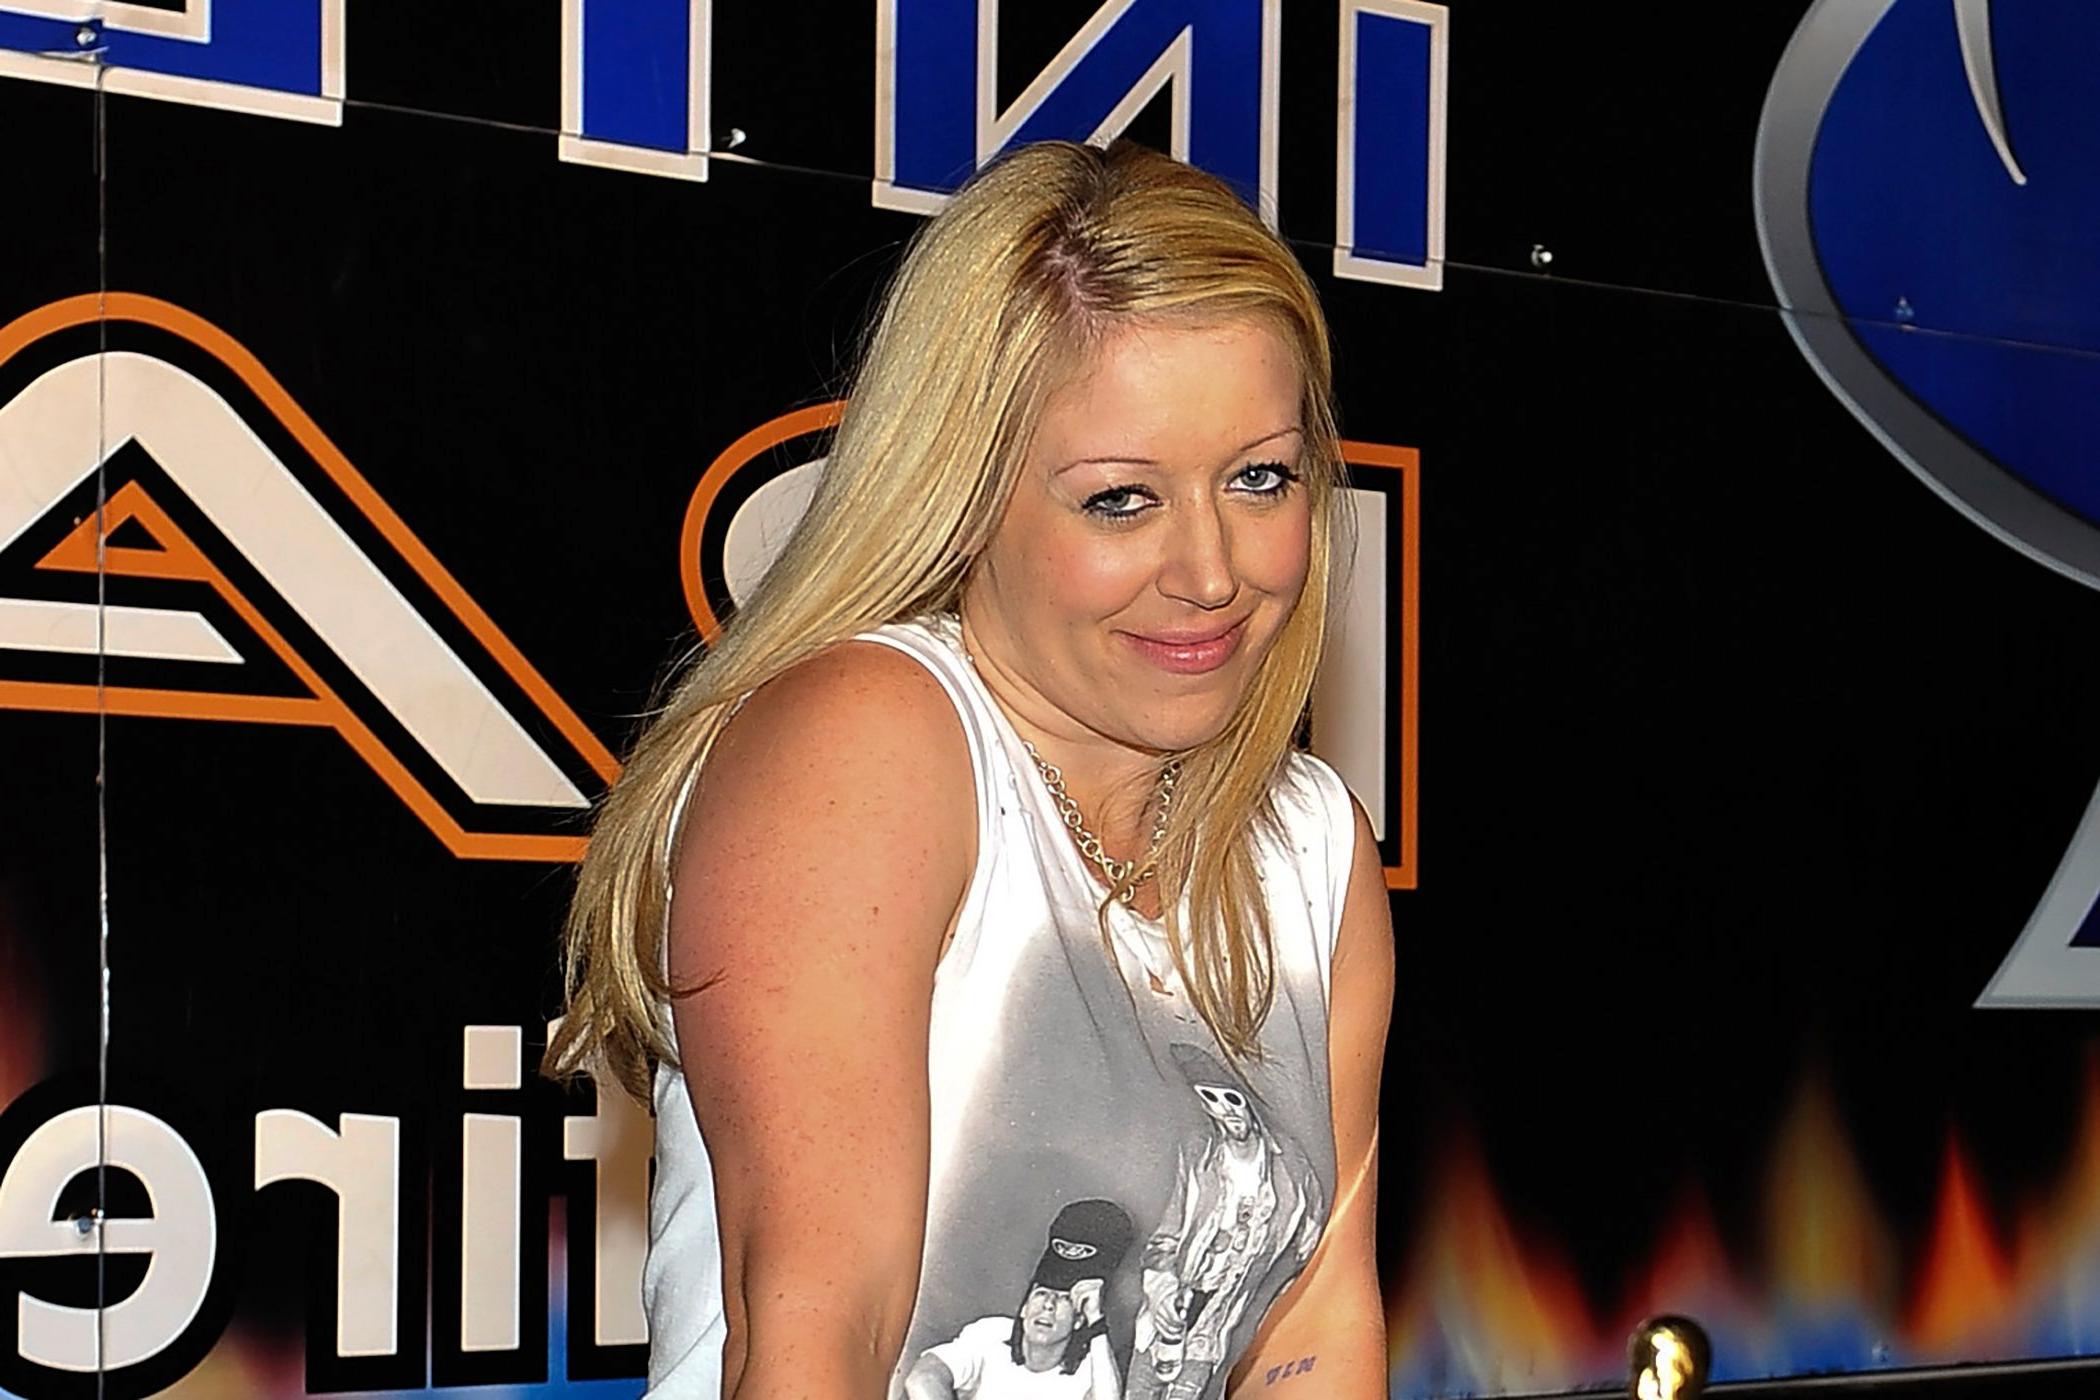 Lynsi Snyder - owner of the famous Burger chain In-N-Out 